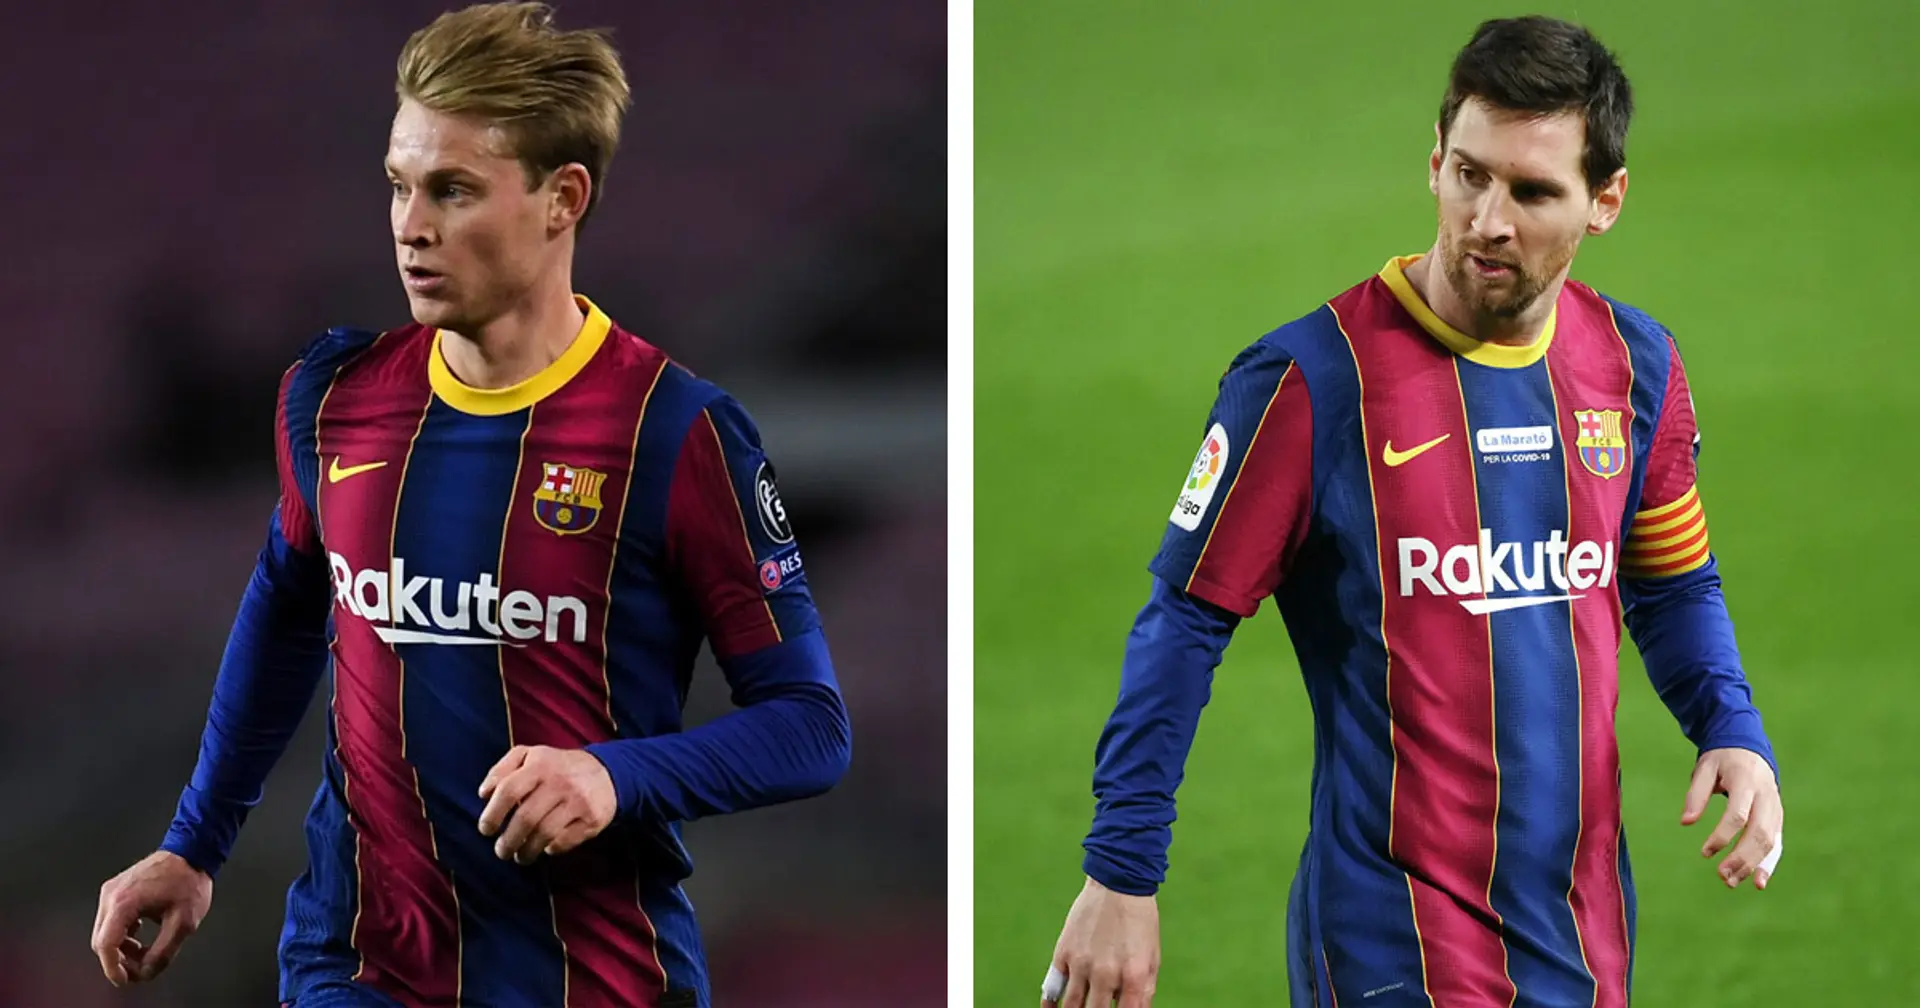 De Jong leading the way, Messi in close second: ranking Barca players by game time